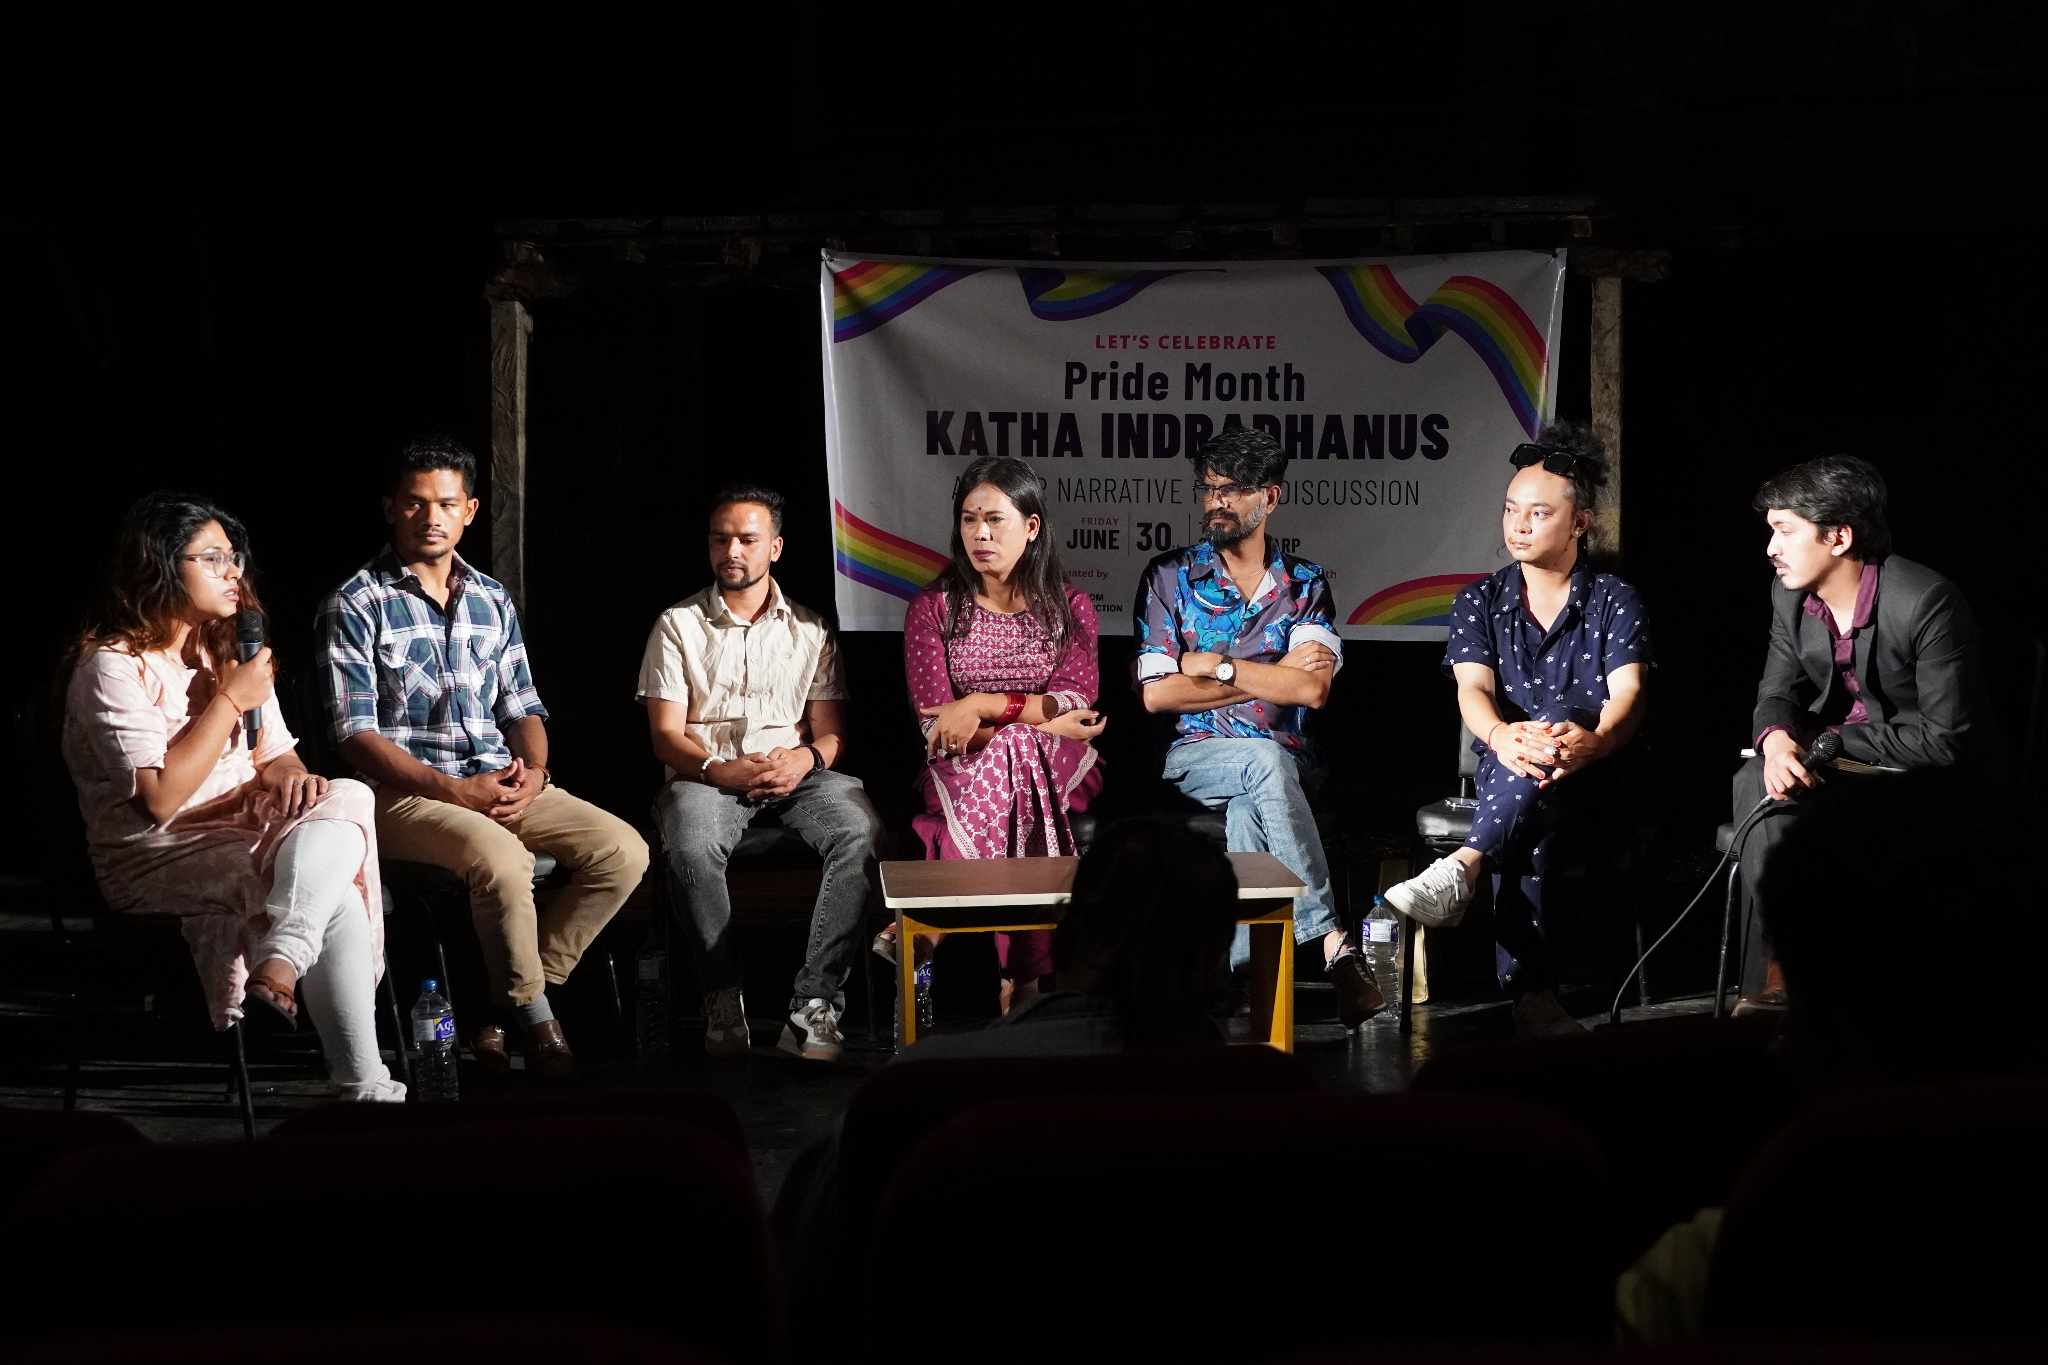 Indradhanus:  Panel discussion explores changes and challenges for the LGBTIQA+ community